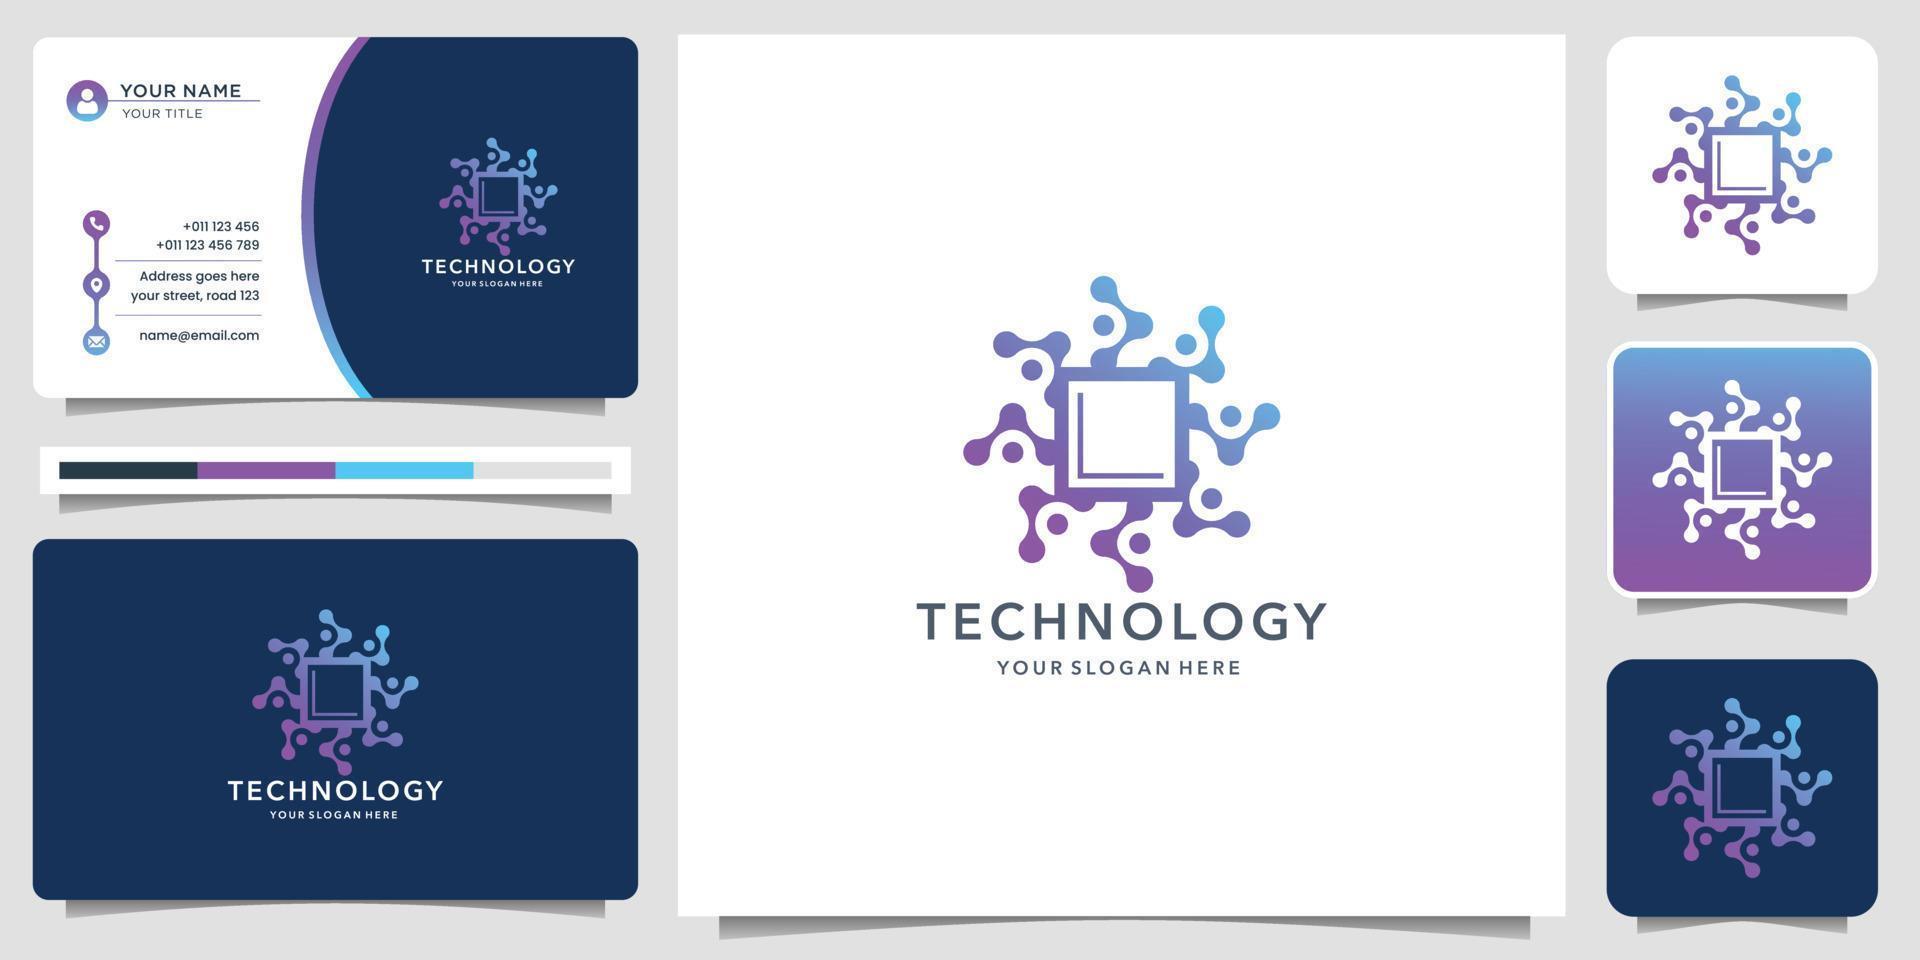 creative of technology logo. chip digital logo, abstract dot concept with business card template. vector